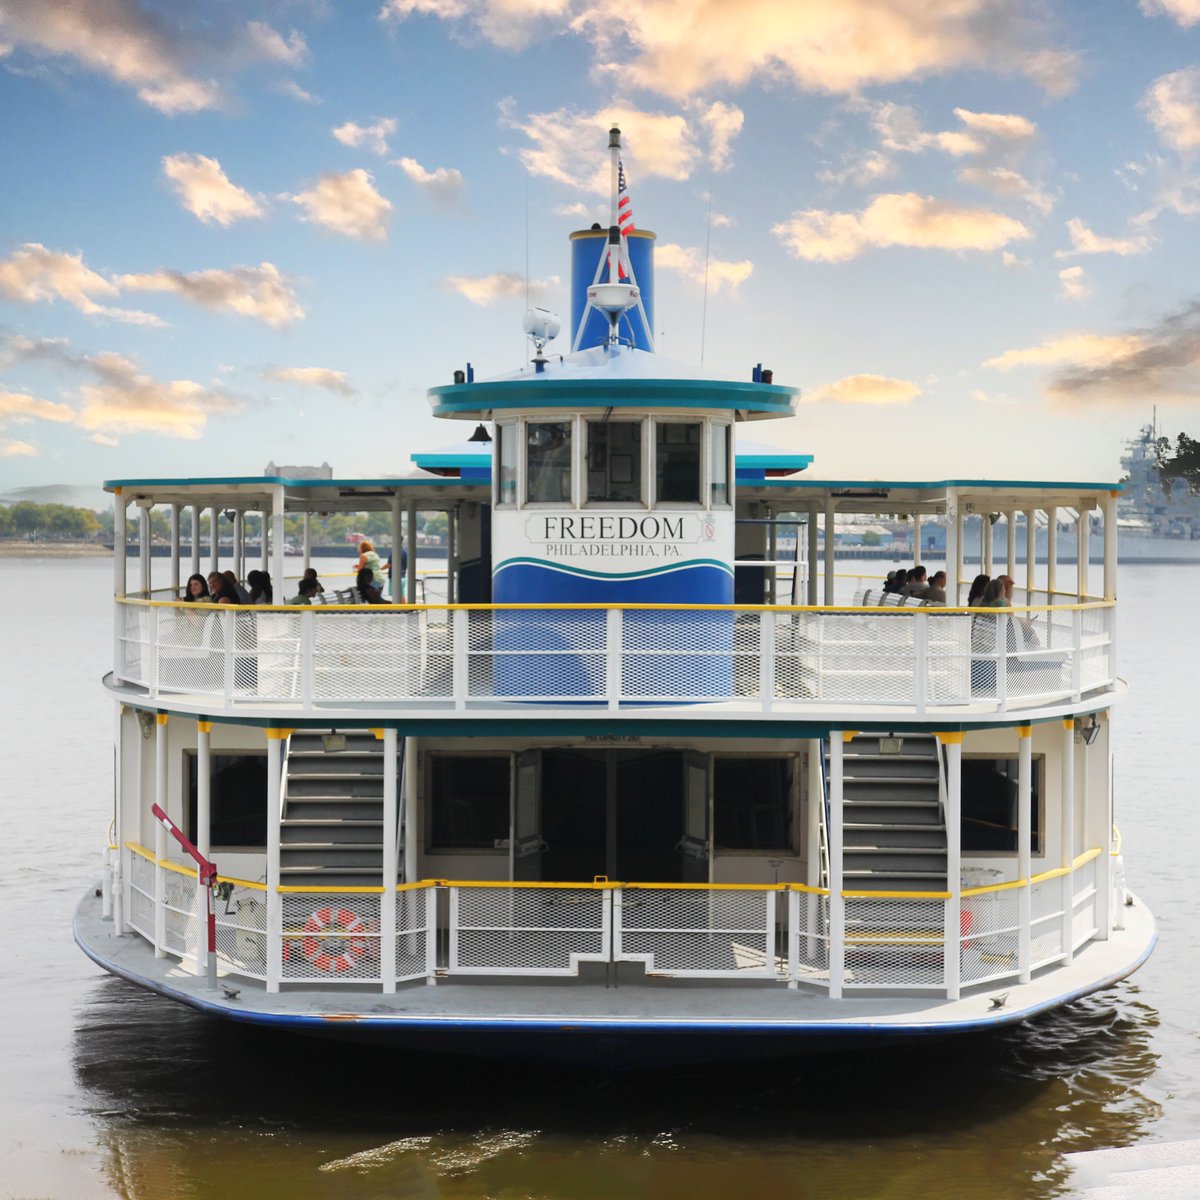 The @RiverLinkFerry is BACK! Today marks the start of the 2024 season with daily service between Camden and Philadelphia. If you are headed to @Freedom_Pav for the Hozier concert, be sure to get your tickets at RiverLinkFerry.com.

#MyPhillyWaterfront #RiverLinkFerry